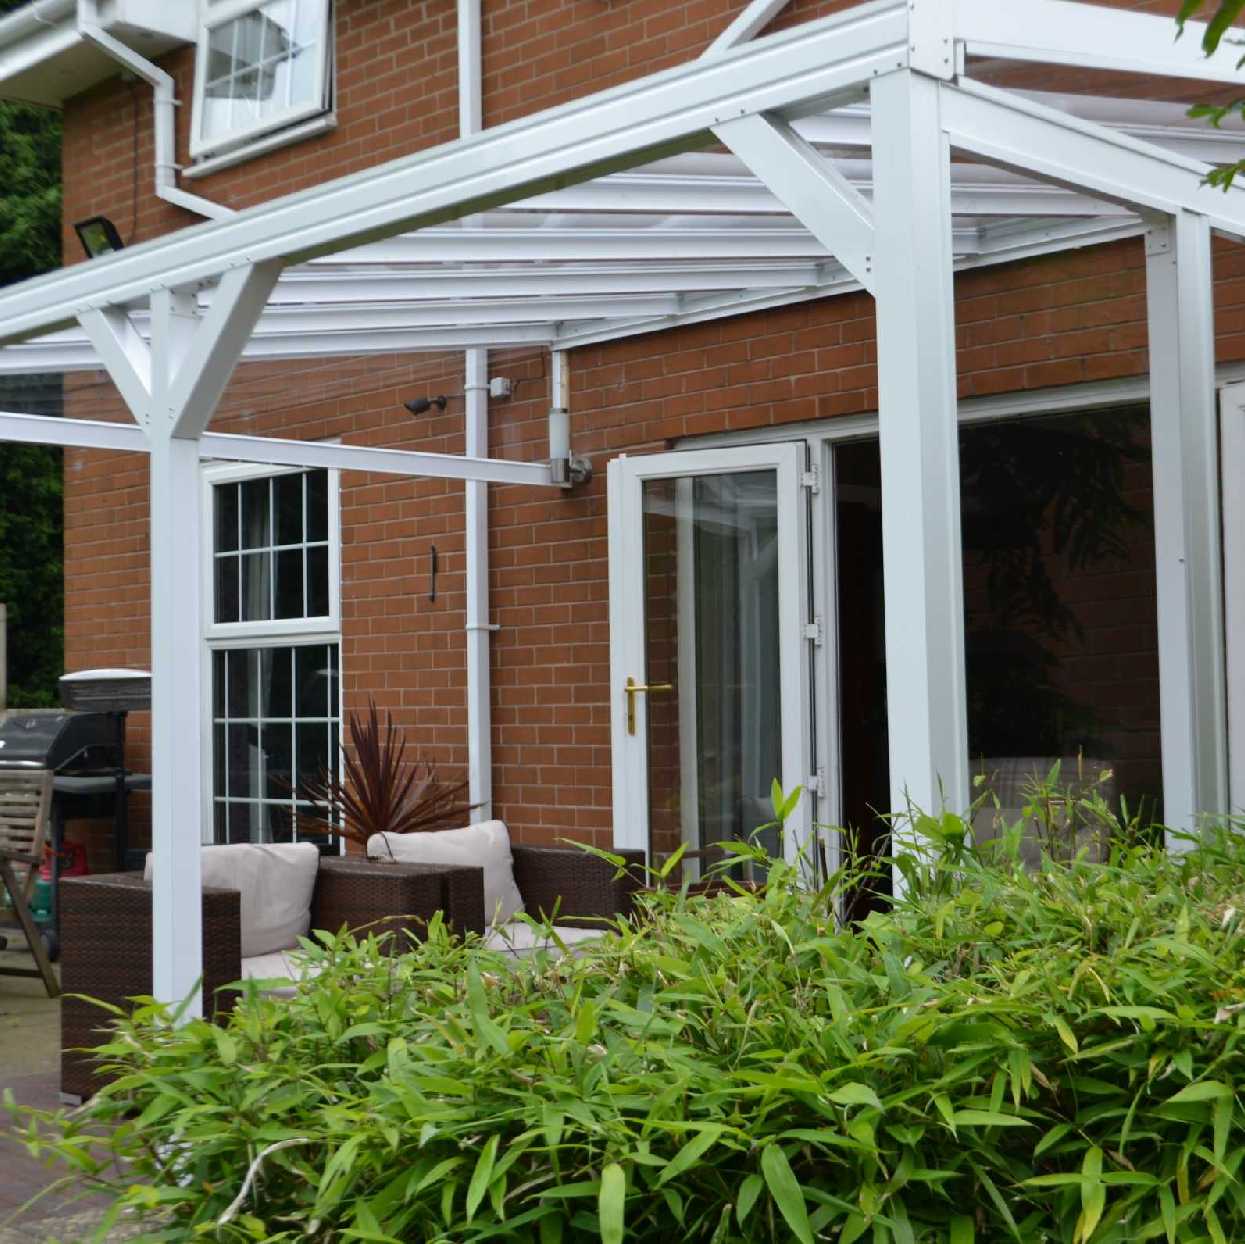 Omega Smart Lean-To Canopy, White UNGLAZED for 6mm Glazing - 3.5m (W) x 2.0m (P), (3) Supporting Posts from Omega Build